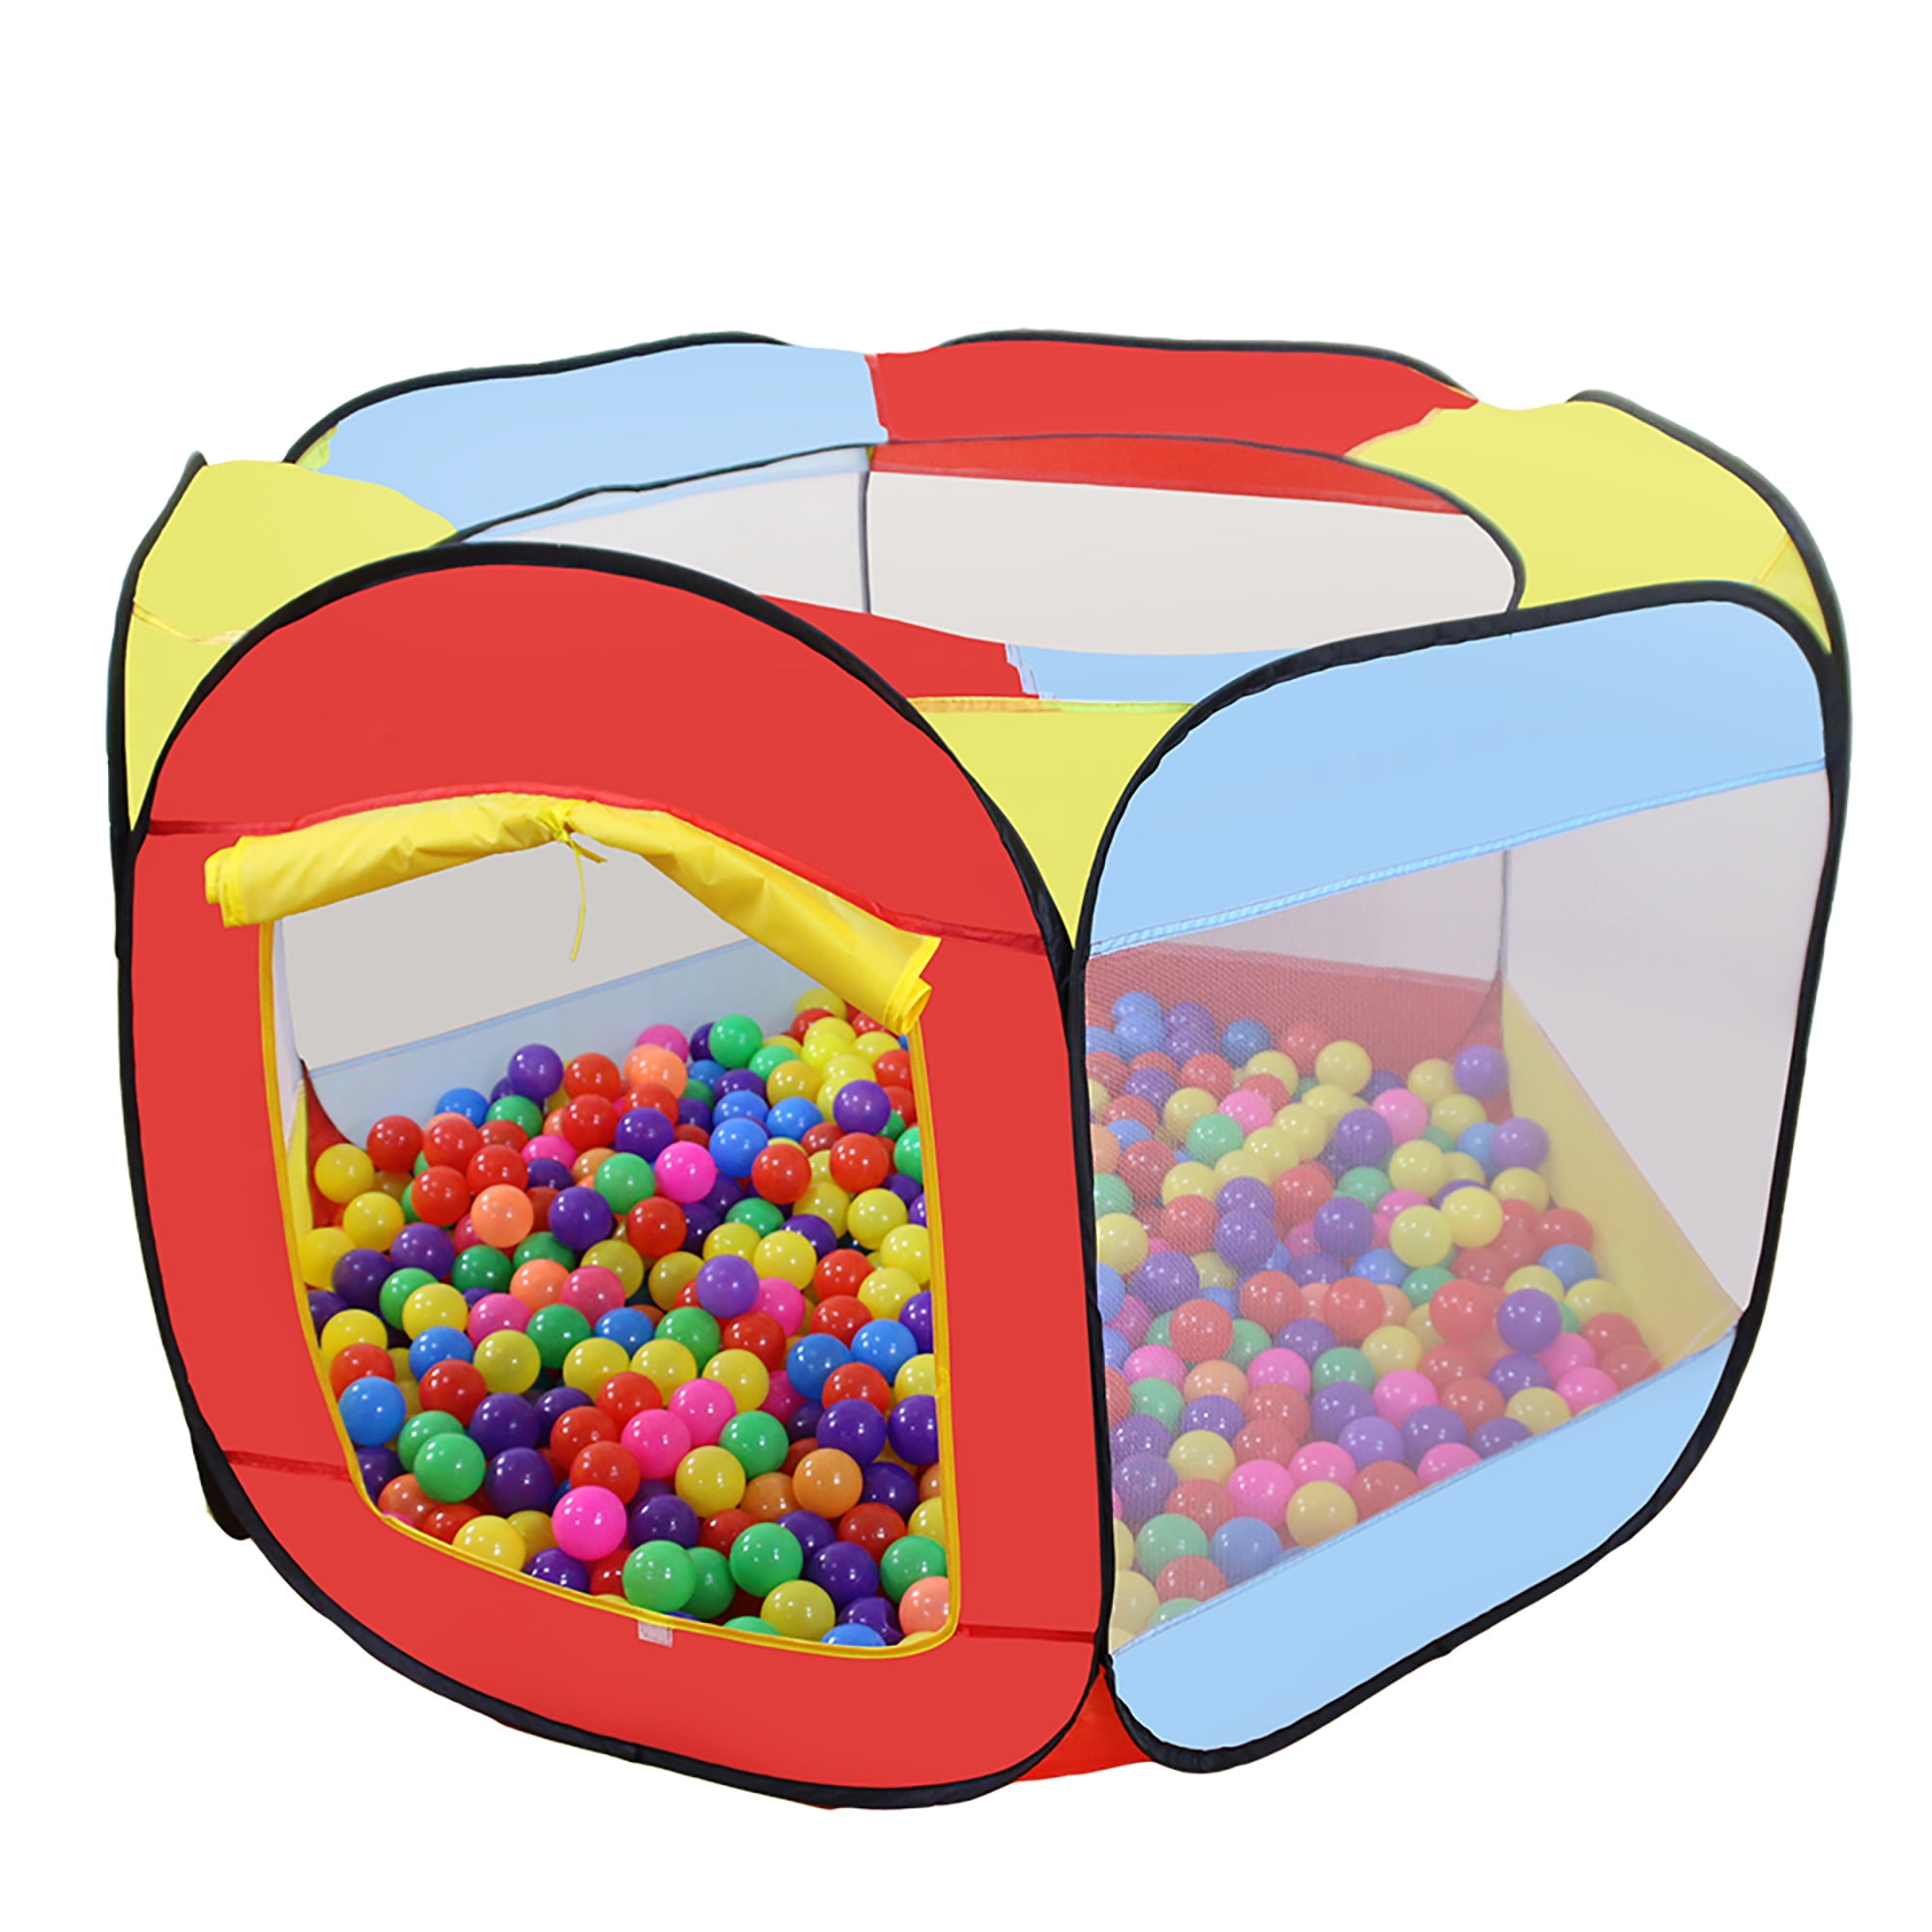 Kids Rainbow Play Tent Portable Foldable Baby Play House Ocean Ball Pool Tent Children Indoor Outdoor Playhouse Teepee Toys Best Gift for Boys and Girls 